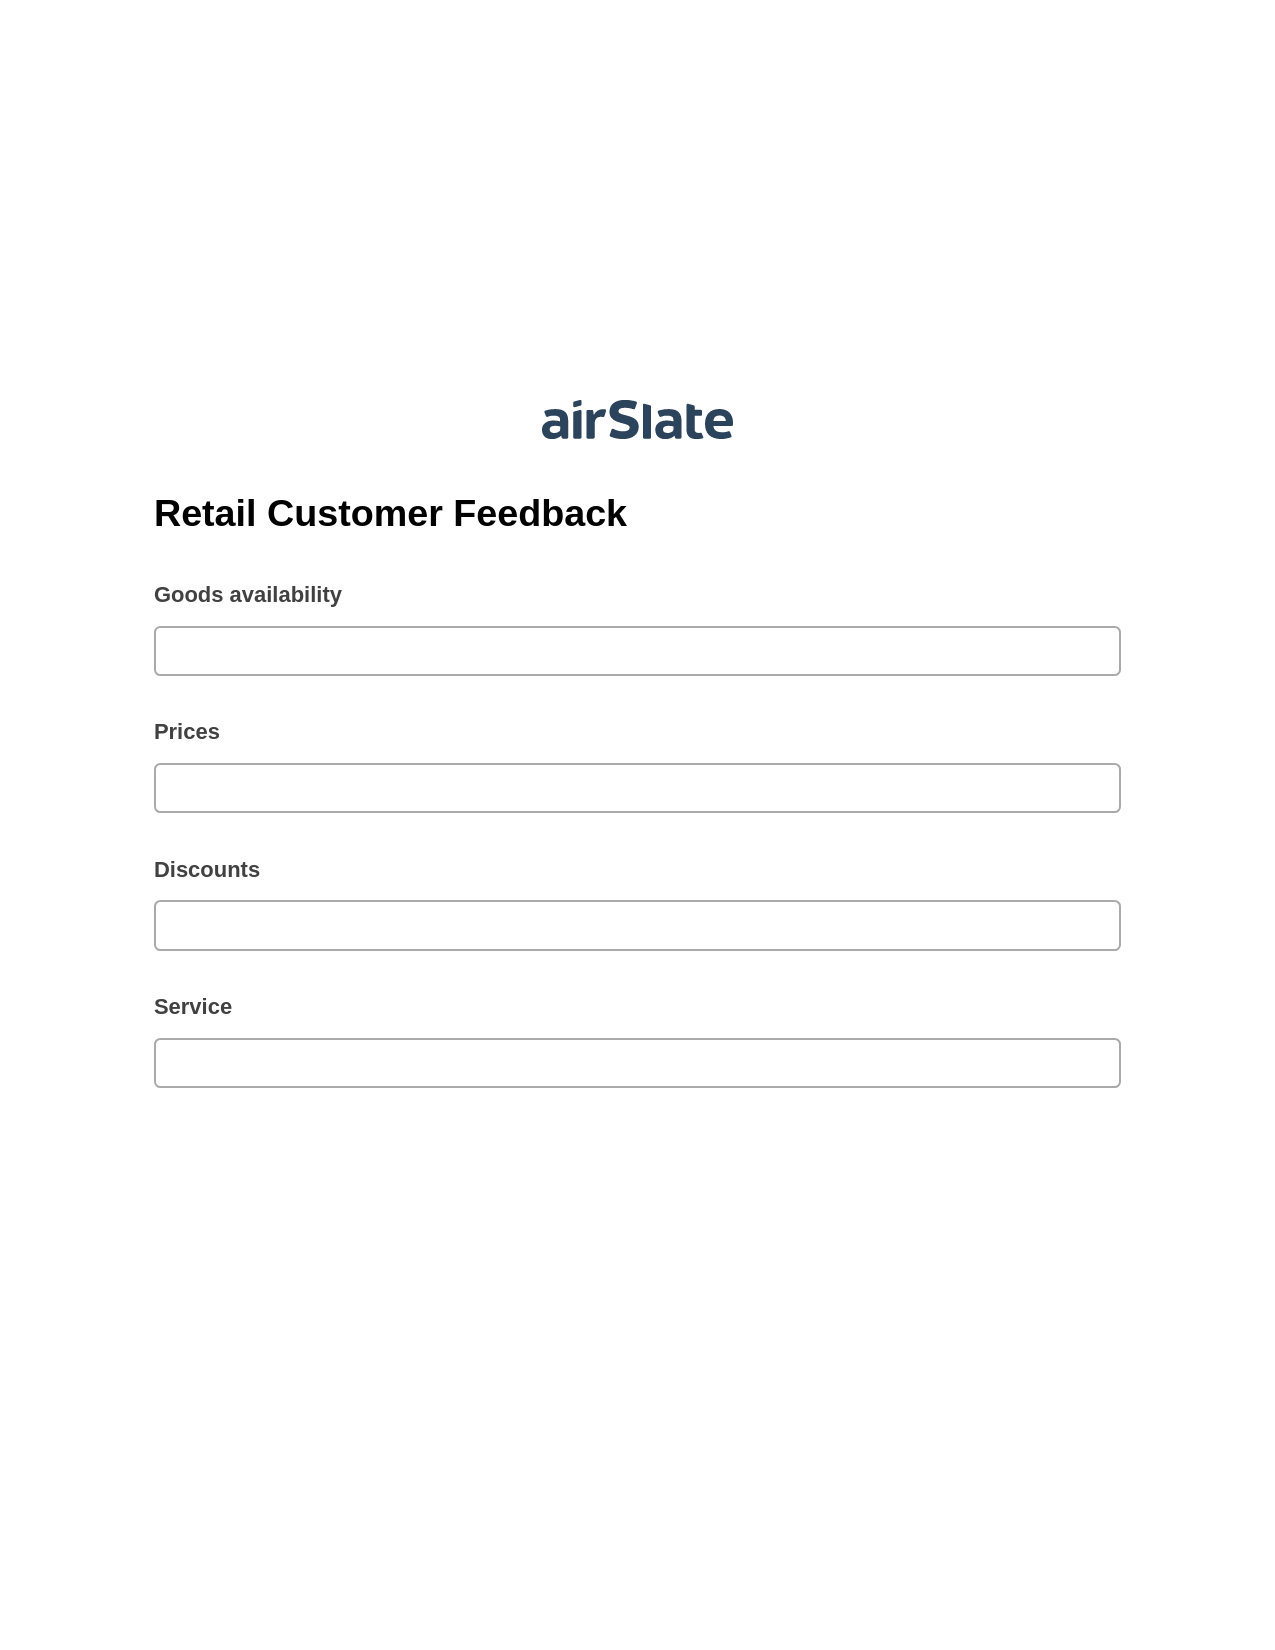 Retail Customer Feedback Pre-fill from AirTable Bot, Update MS Dynamics 365 Records Bot, Export to Smartsheet